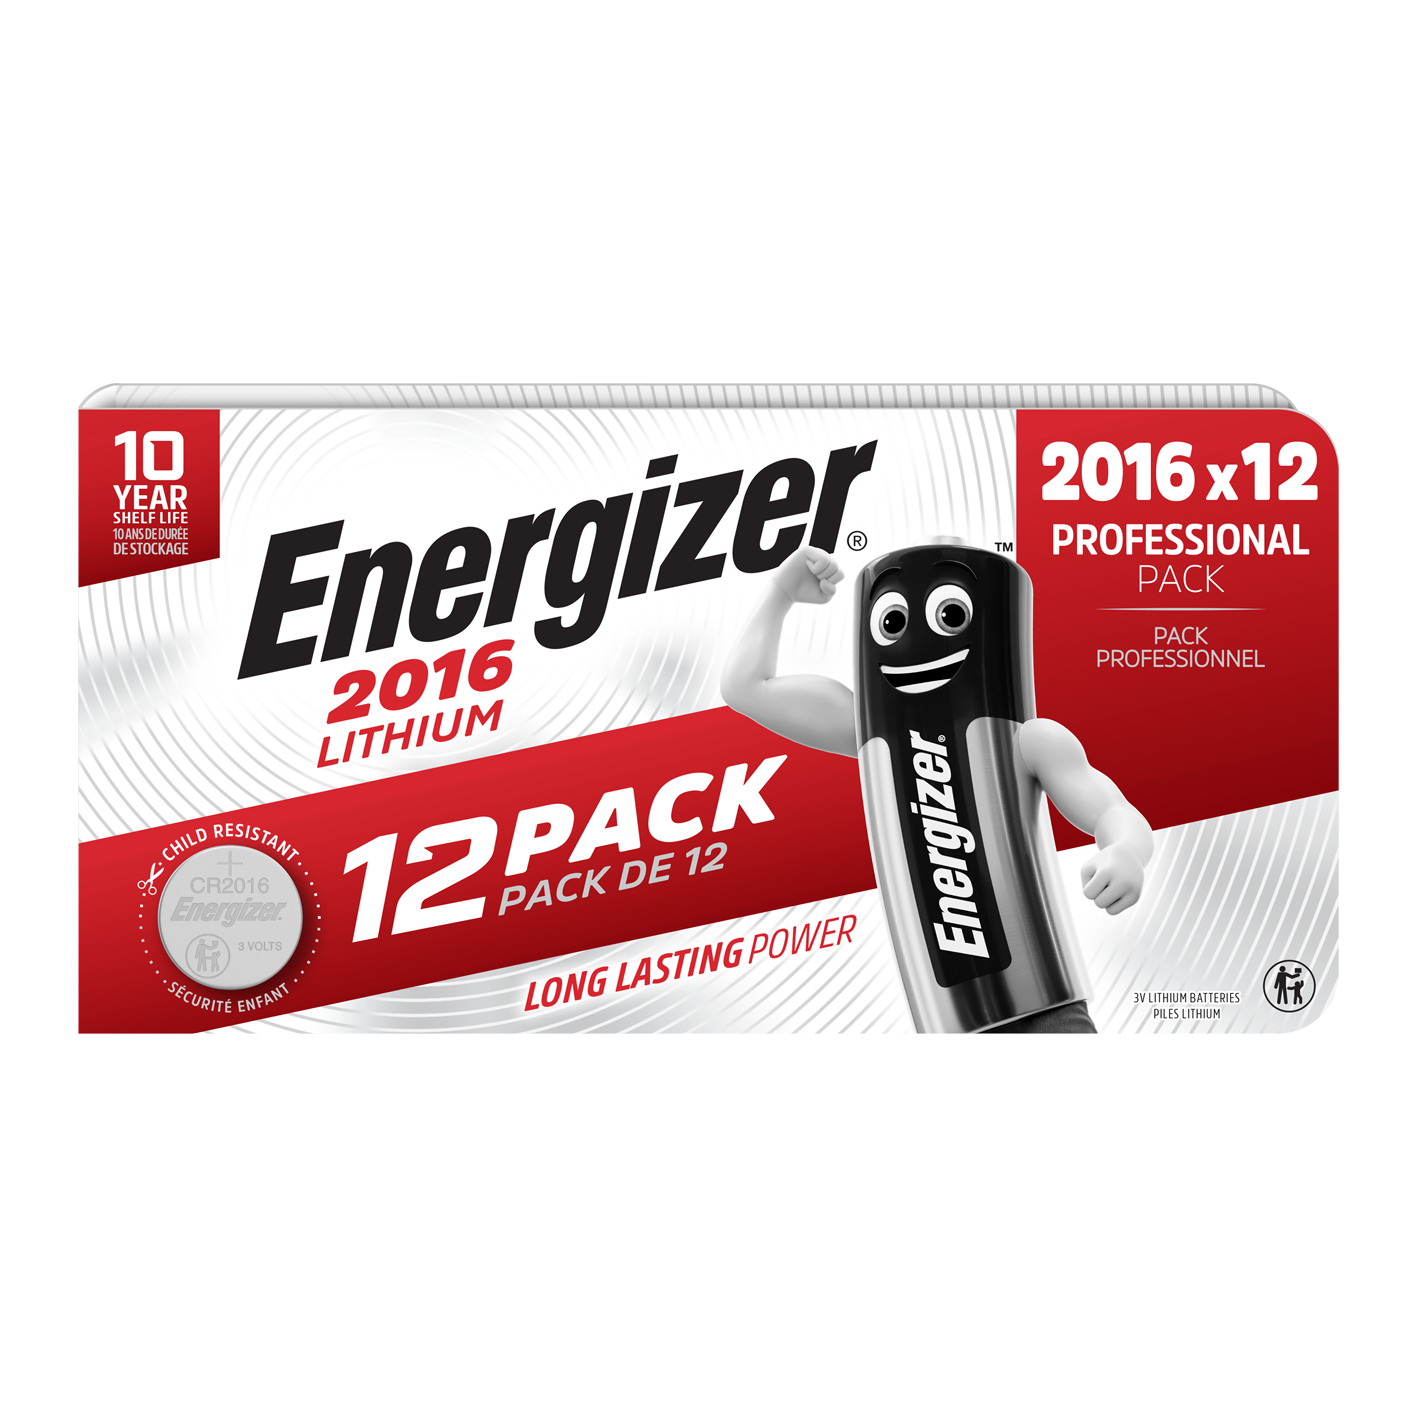 Energizer 2016 Lithium, pack of 12